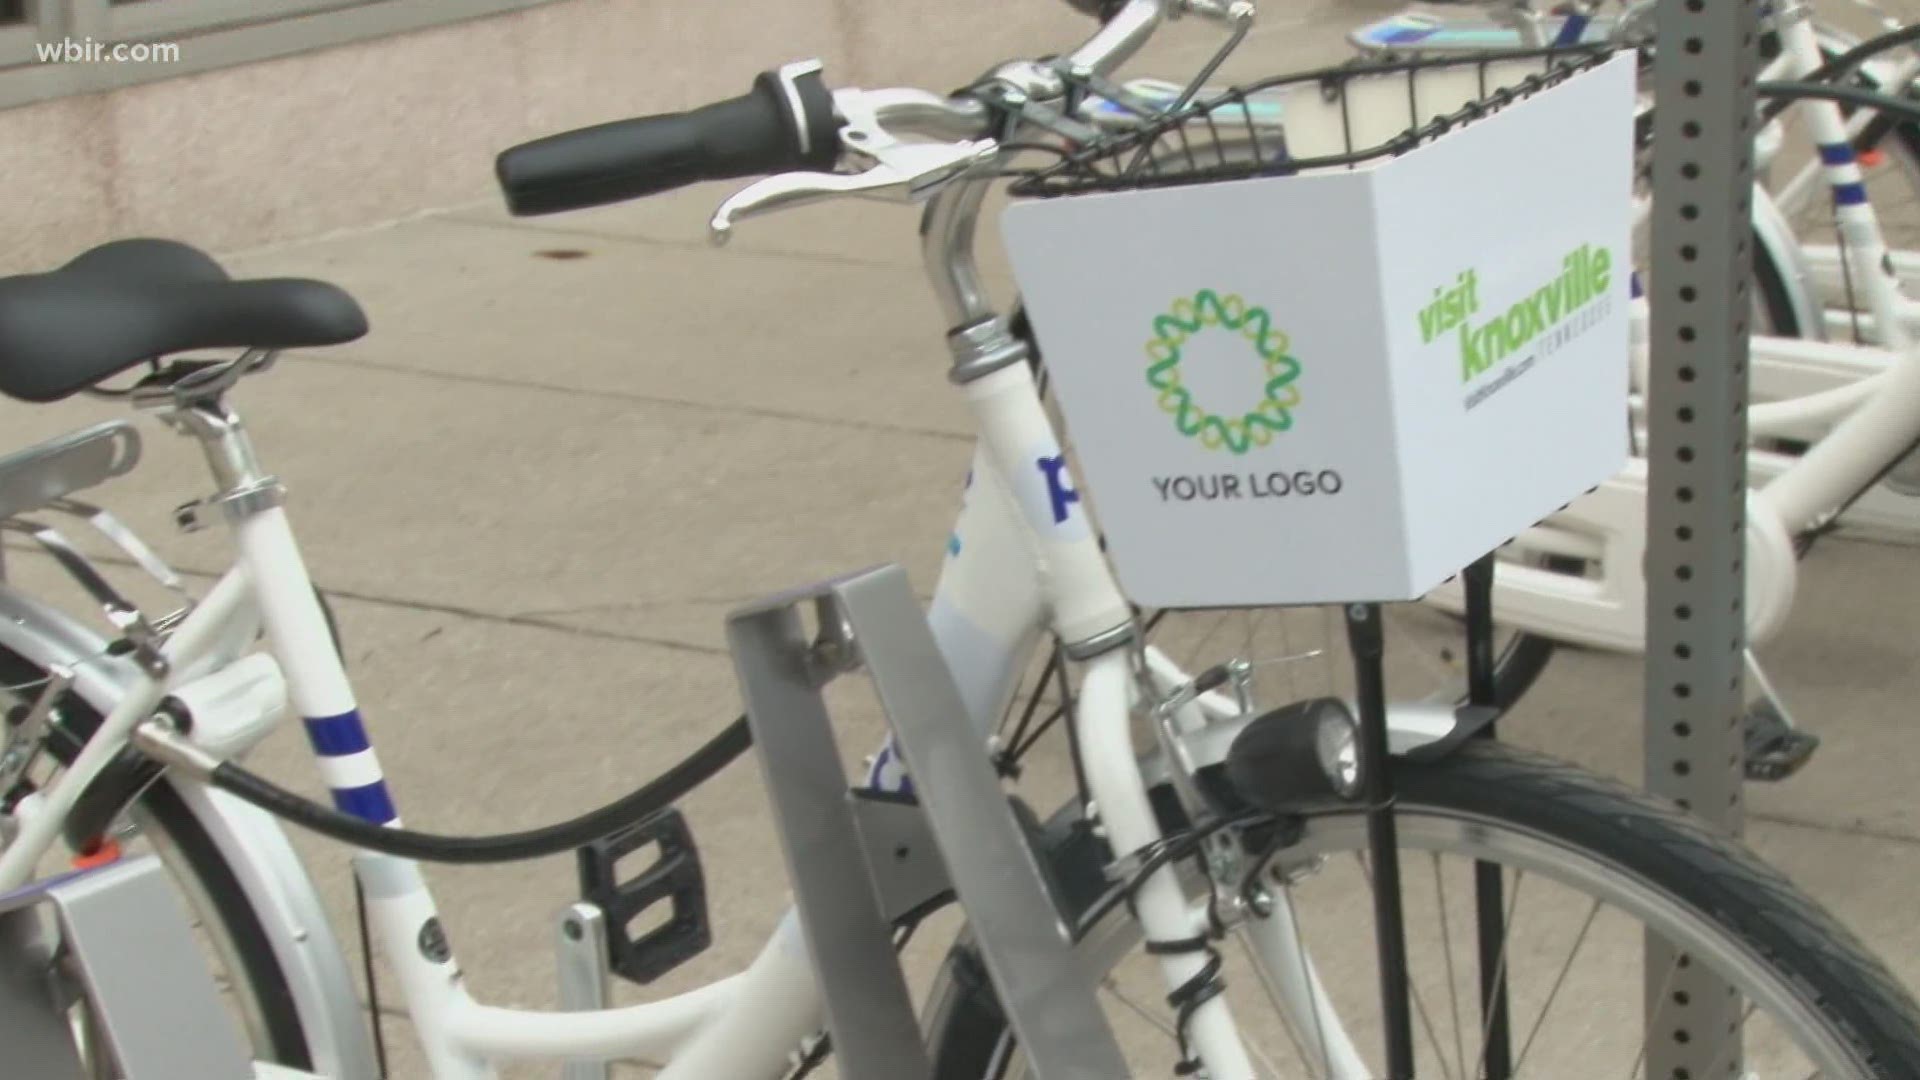 The city of Knoxville says its bike-sharing program will be paused while it looks for a new vendor.